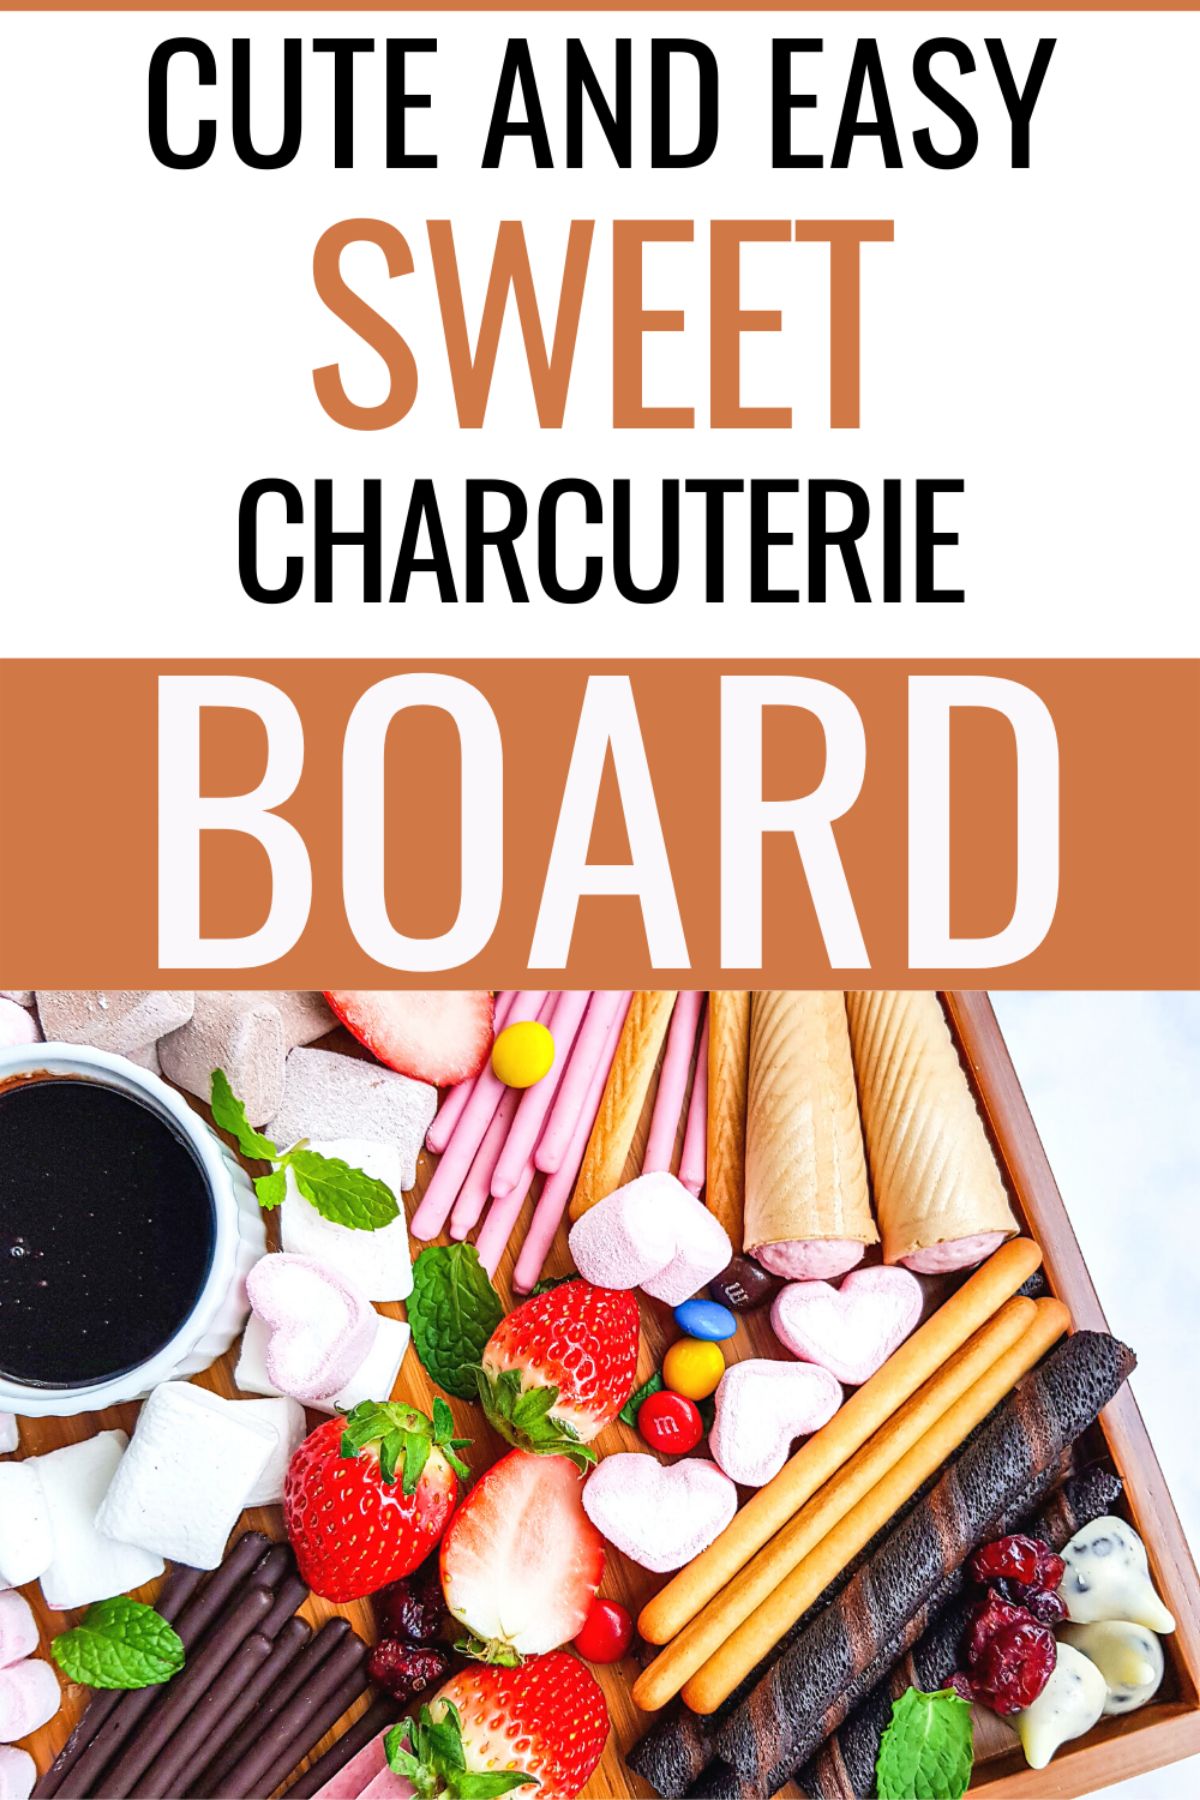 This Sweet Charcuterie Board is the perfect way to bring together all of your favorite sweet snacks. Share it with your family and friends! #sweetcharcuterieboard #sweetcharcuterie #charcuterie #sweetsnack via @wondermomwannab